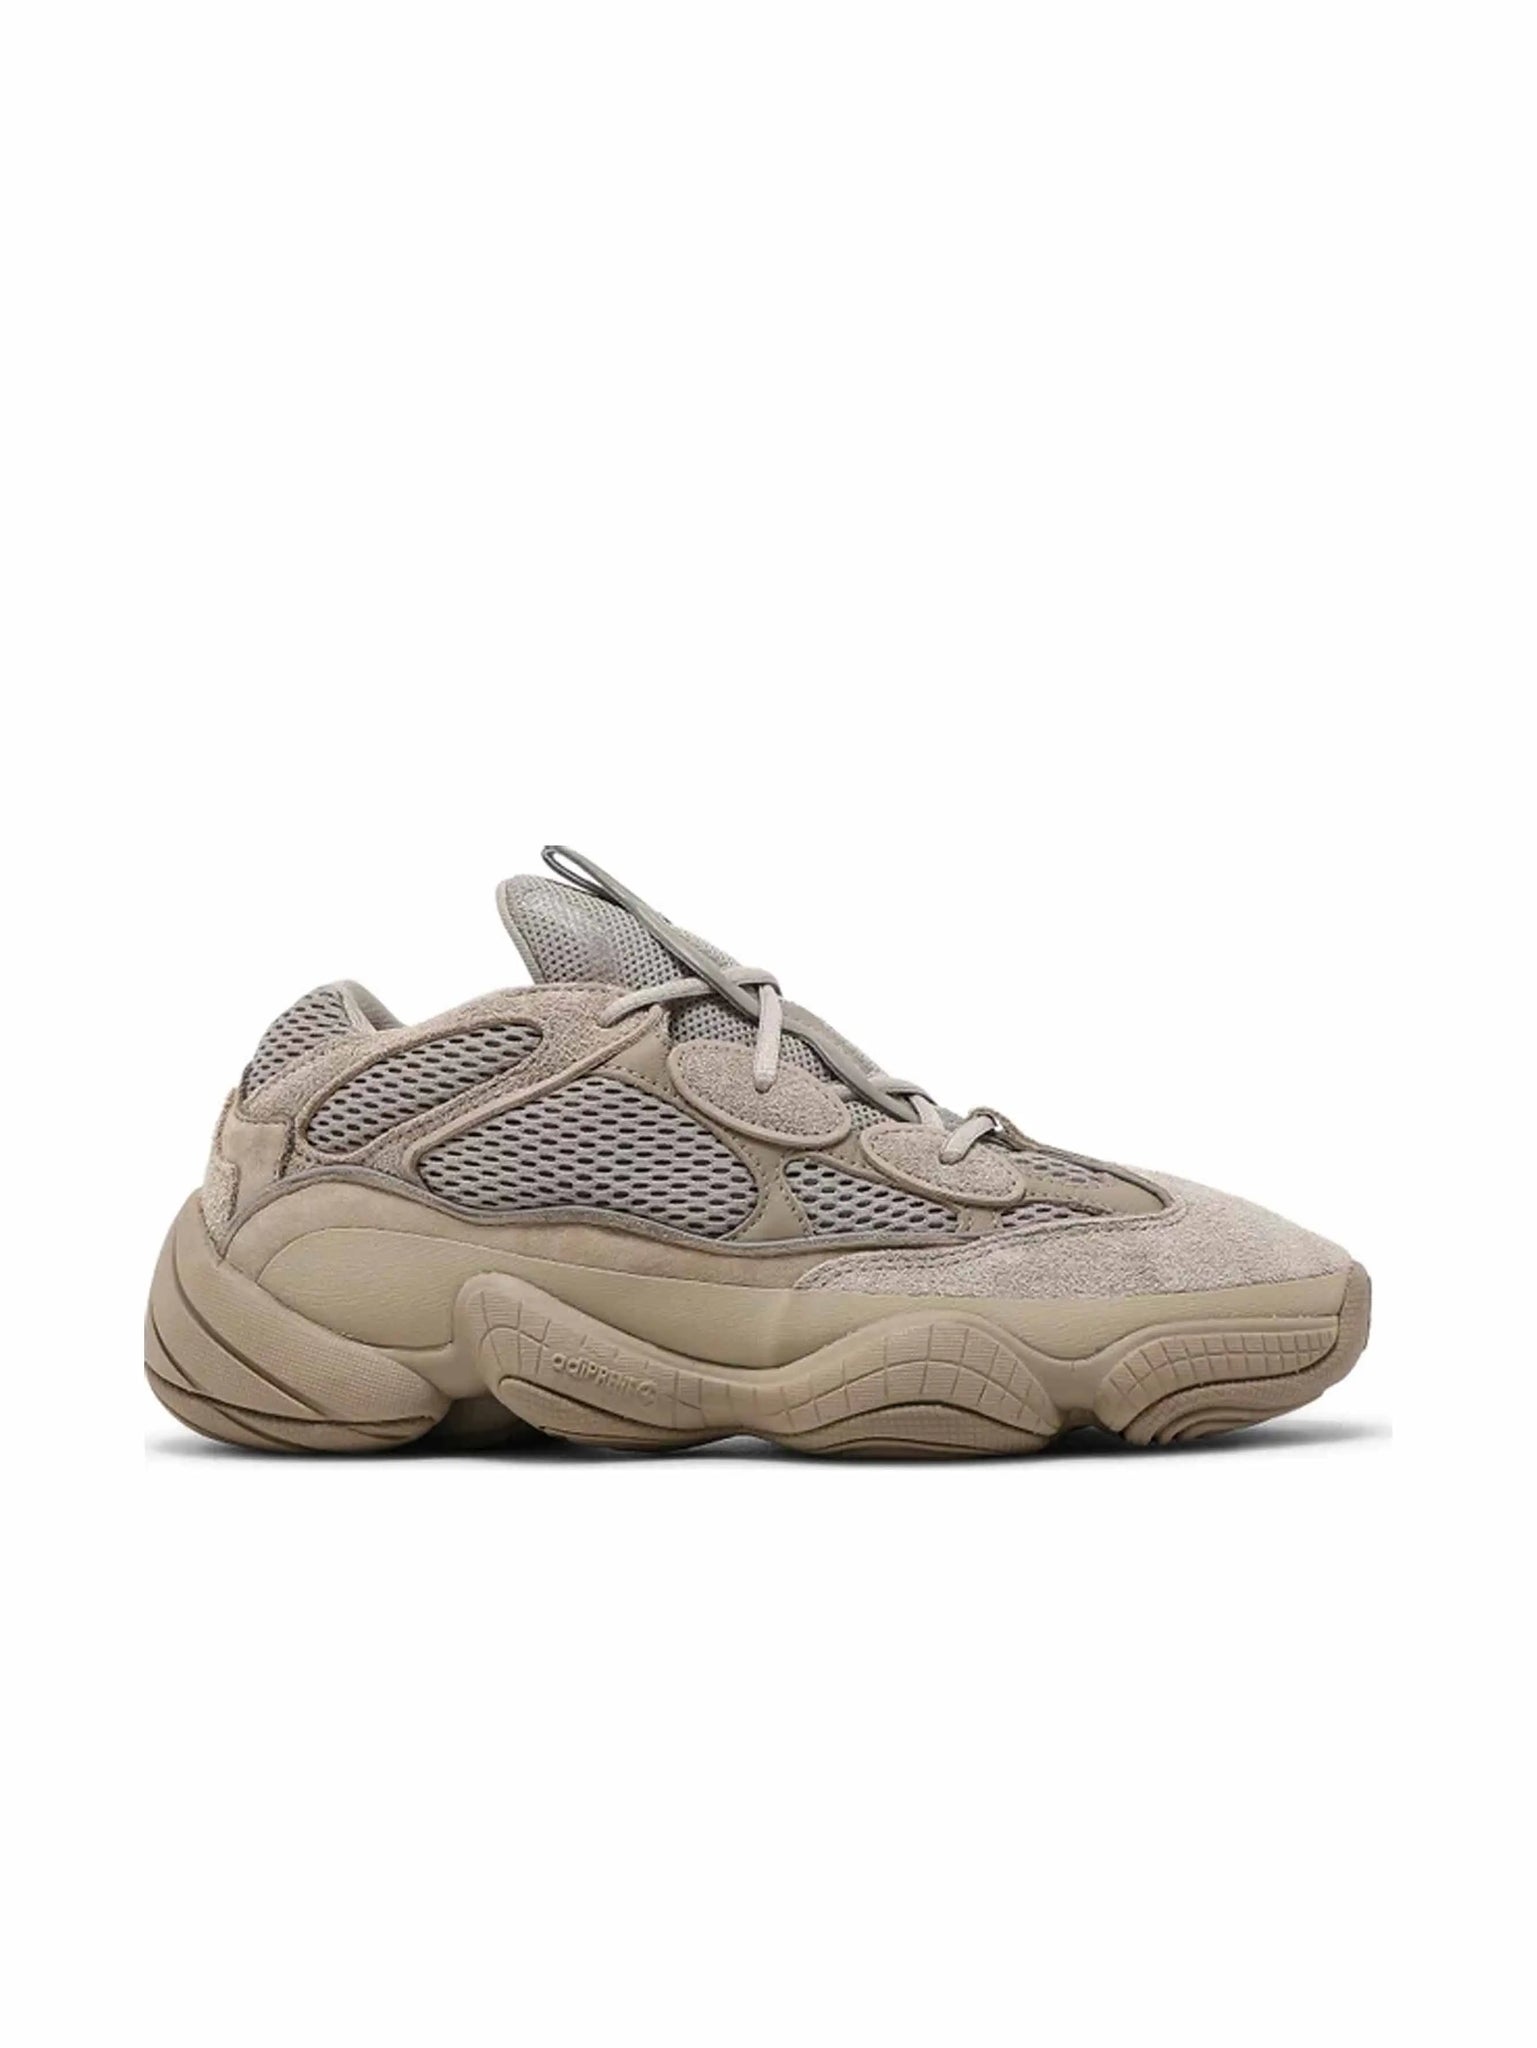 Adidas Yeezy 500 Taupe Light in Auckland, New Zealand - Shop name